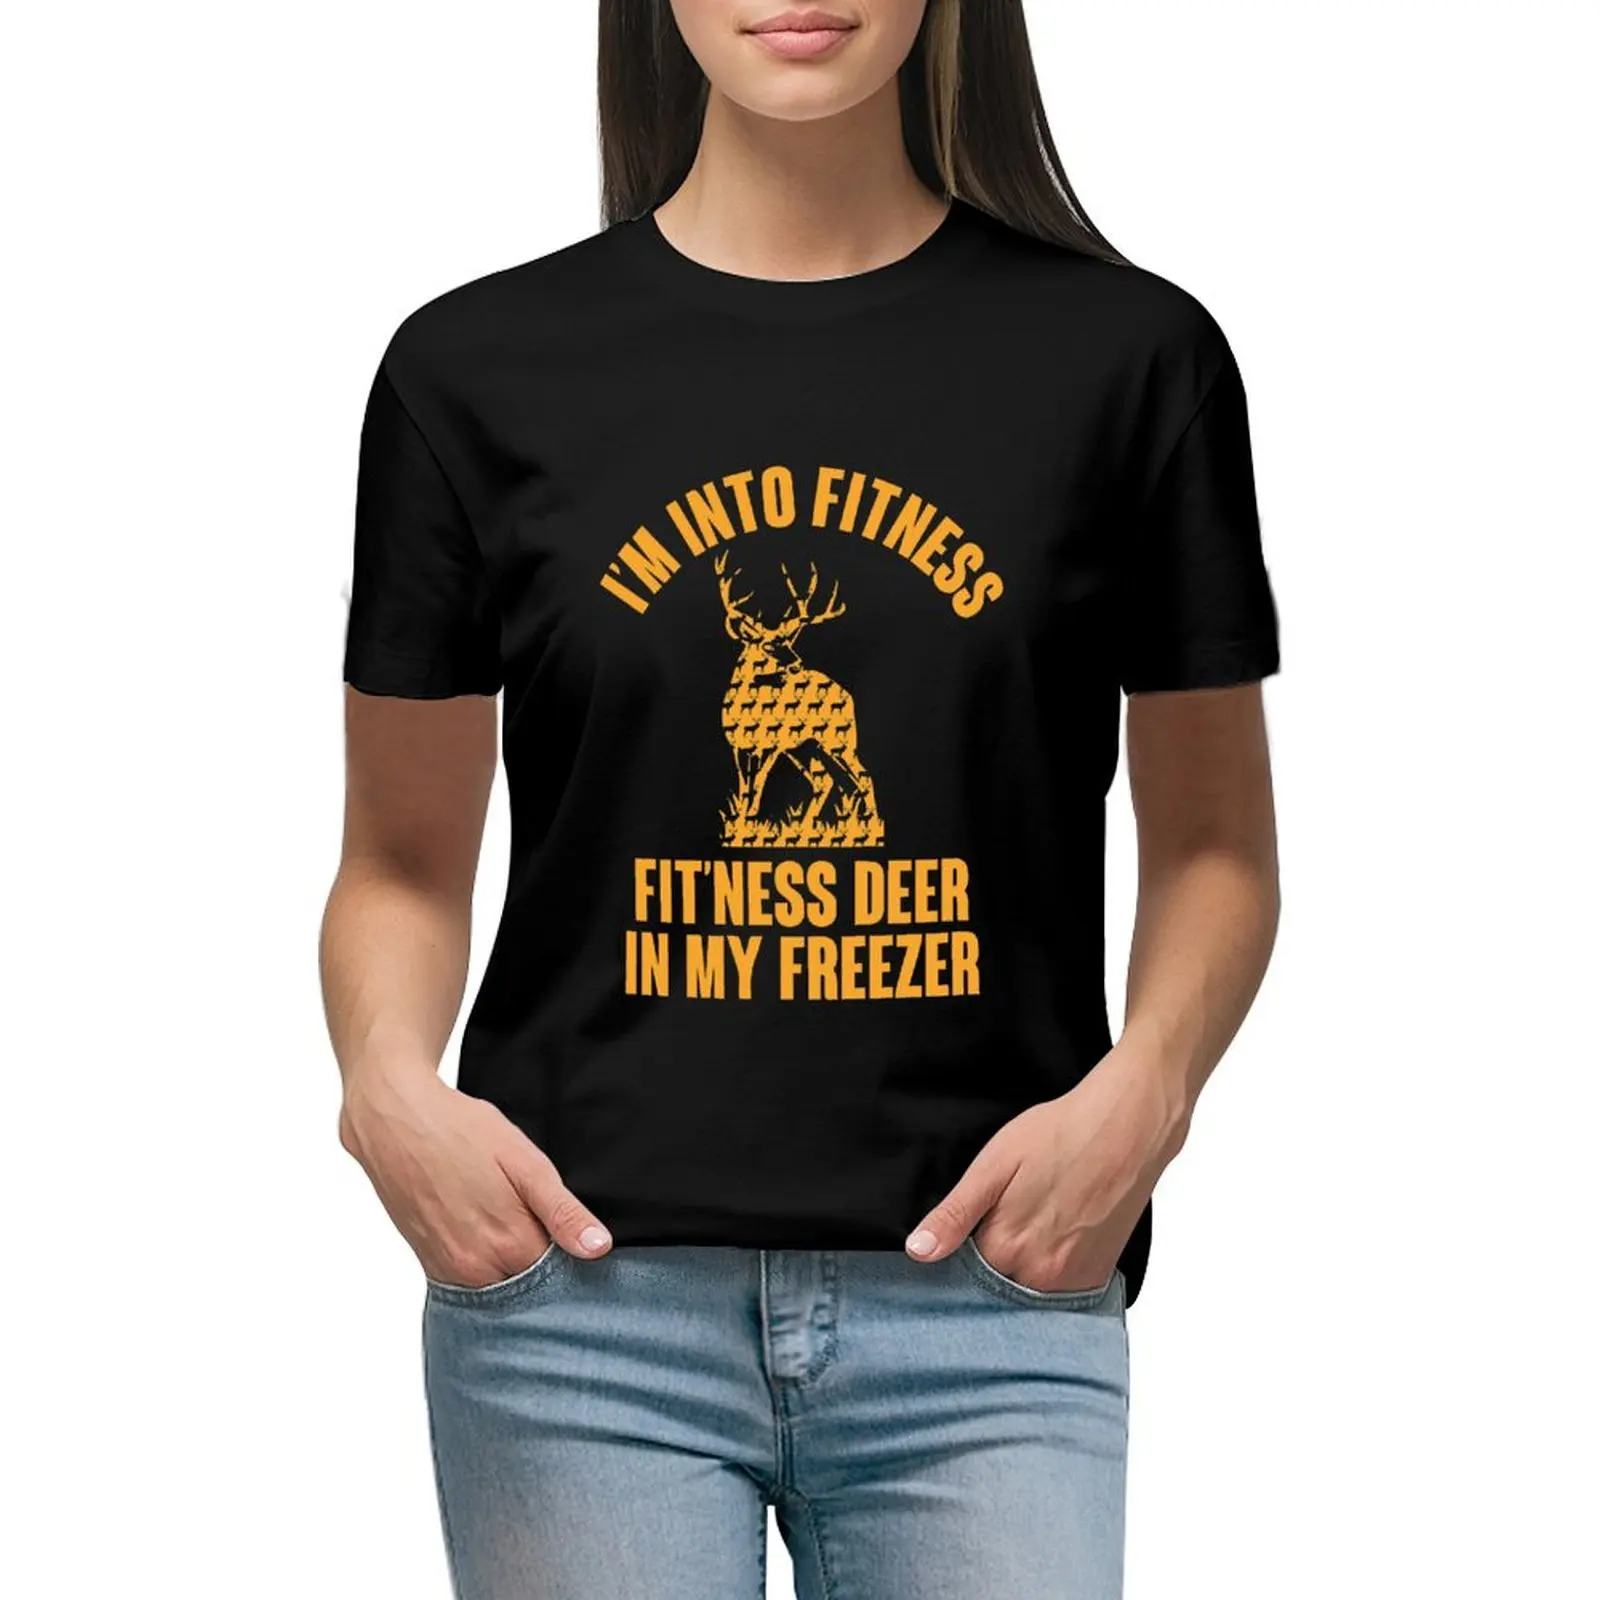 

I'm Into Fitness Fit'ness Deer In My Freezer Funny Hunting T-shirt lady clothes Short sleeve tee woman t shirt